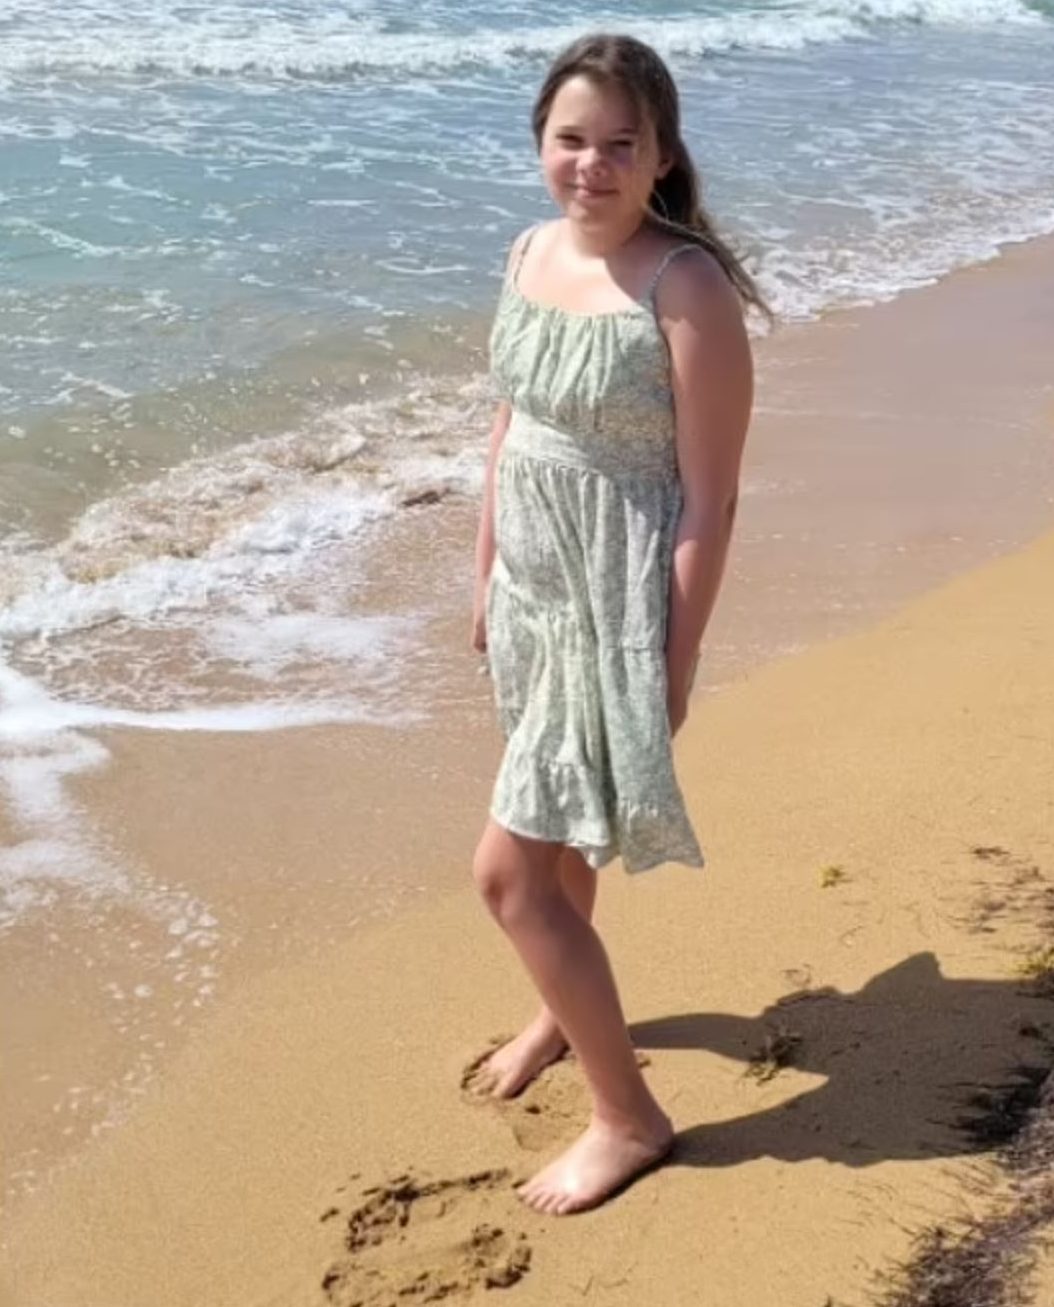 Girl standing on a beach. Ocean and sand in the background. 